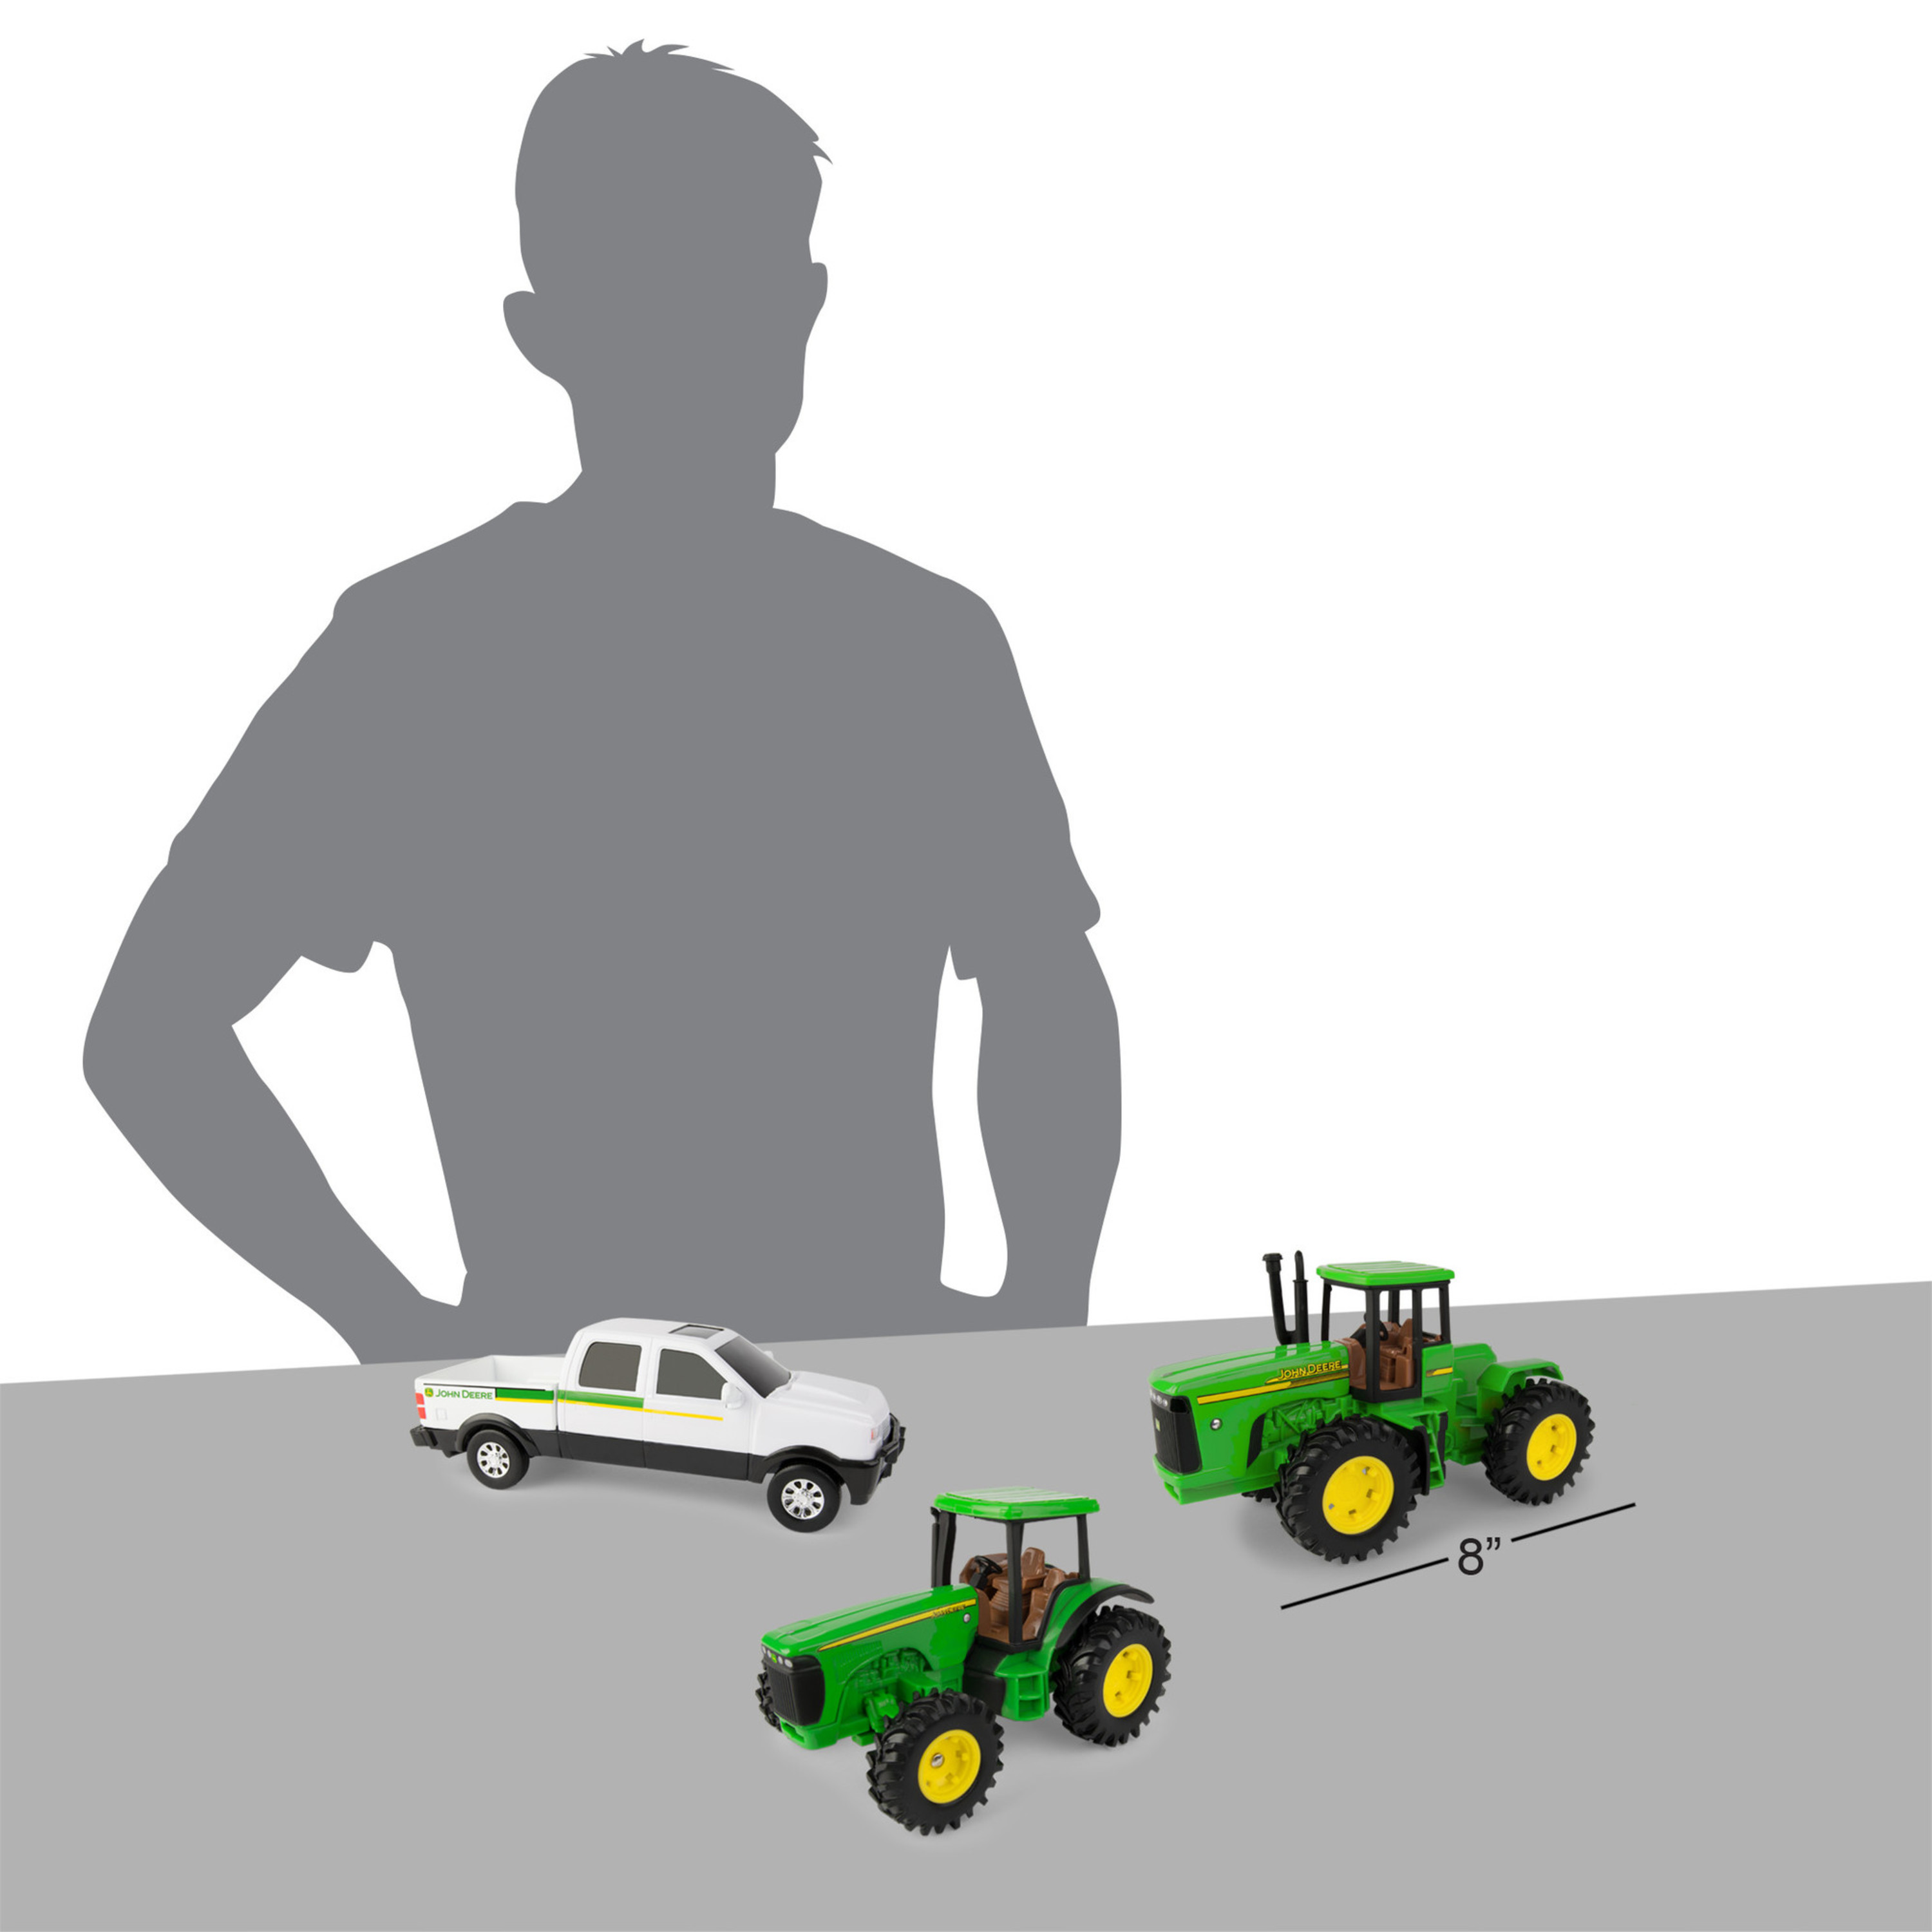 John Deere Vehicle Value Gift Set - Toy Pickup Truck And Two Toy Tractors, 3 Pack - image 2 of 3